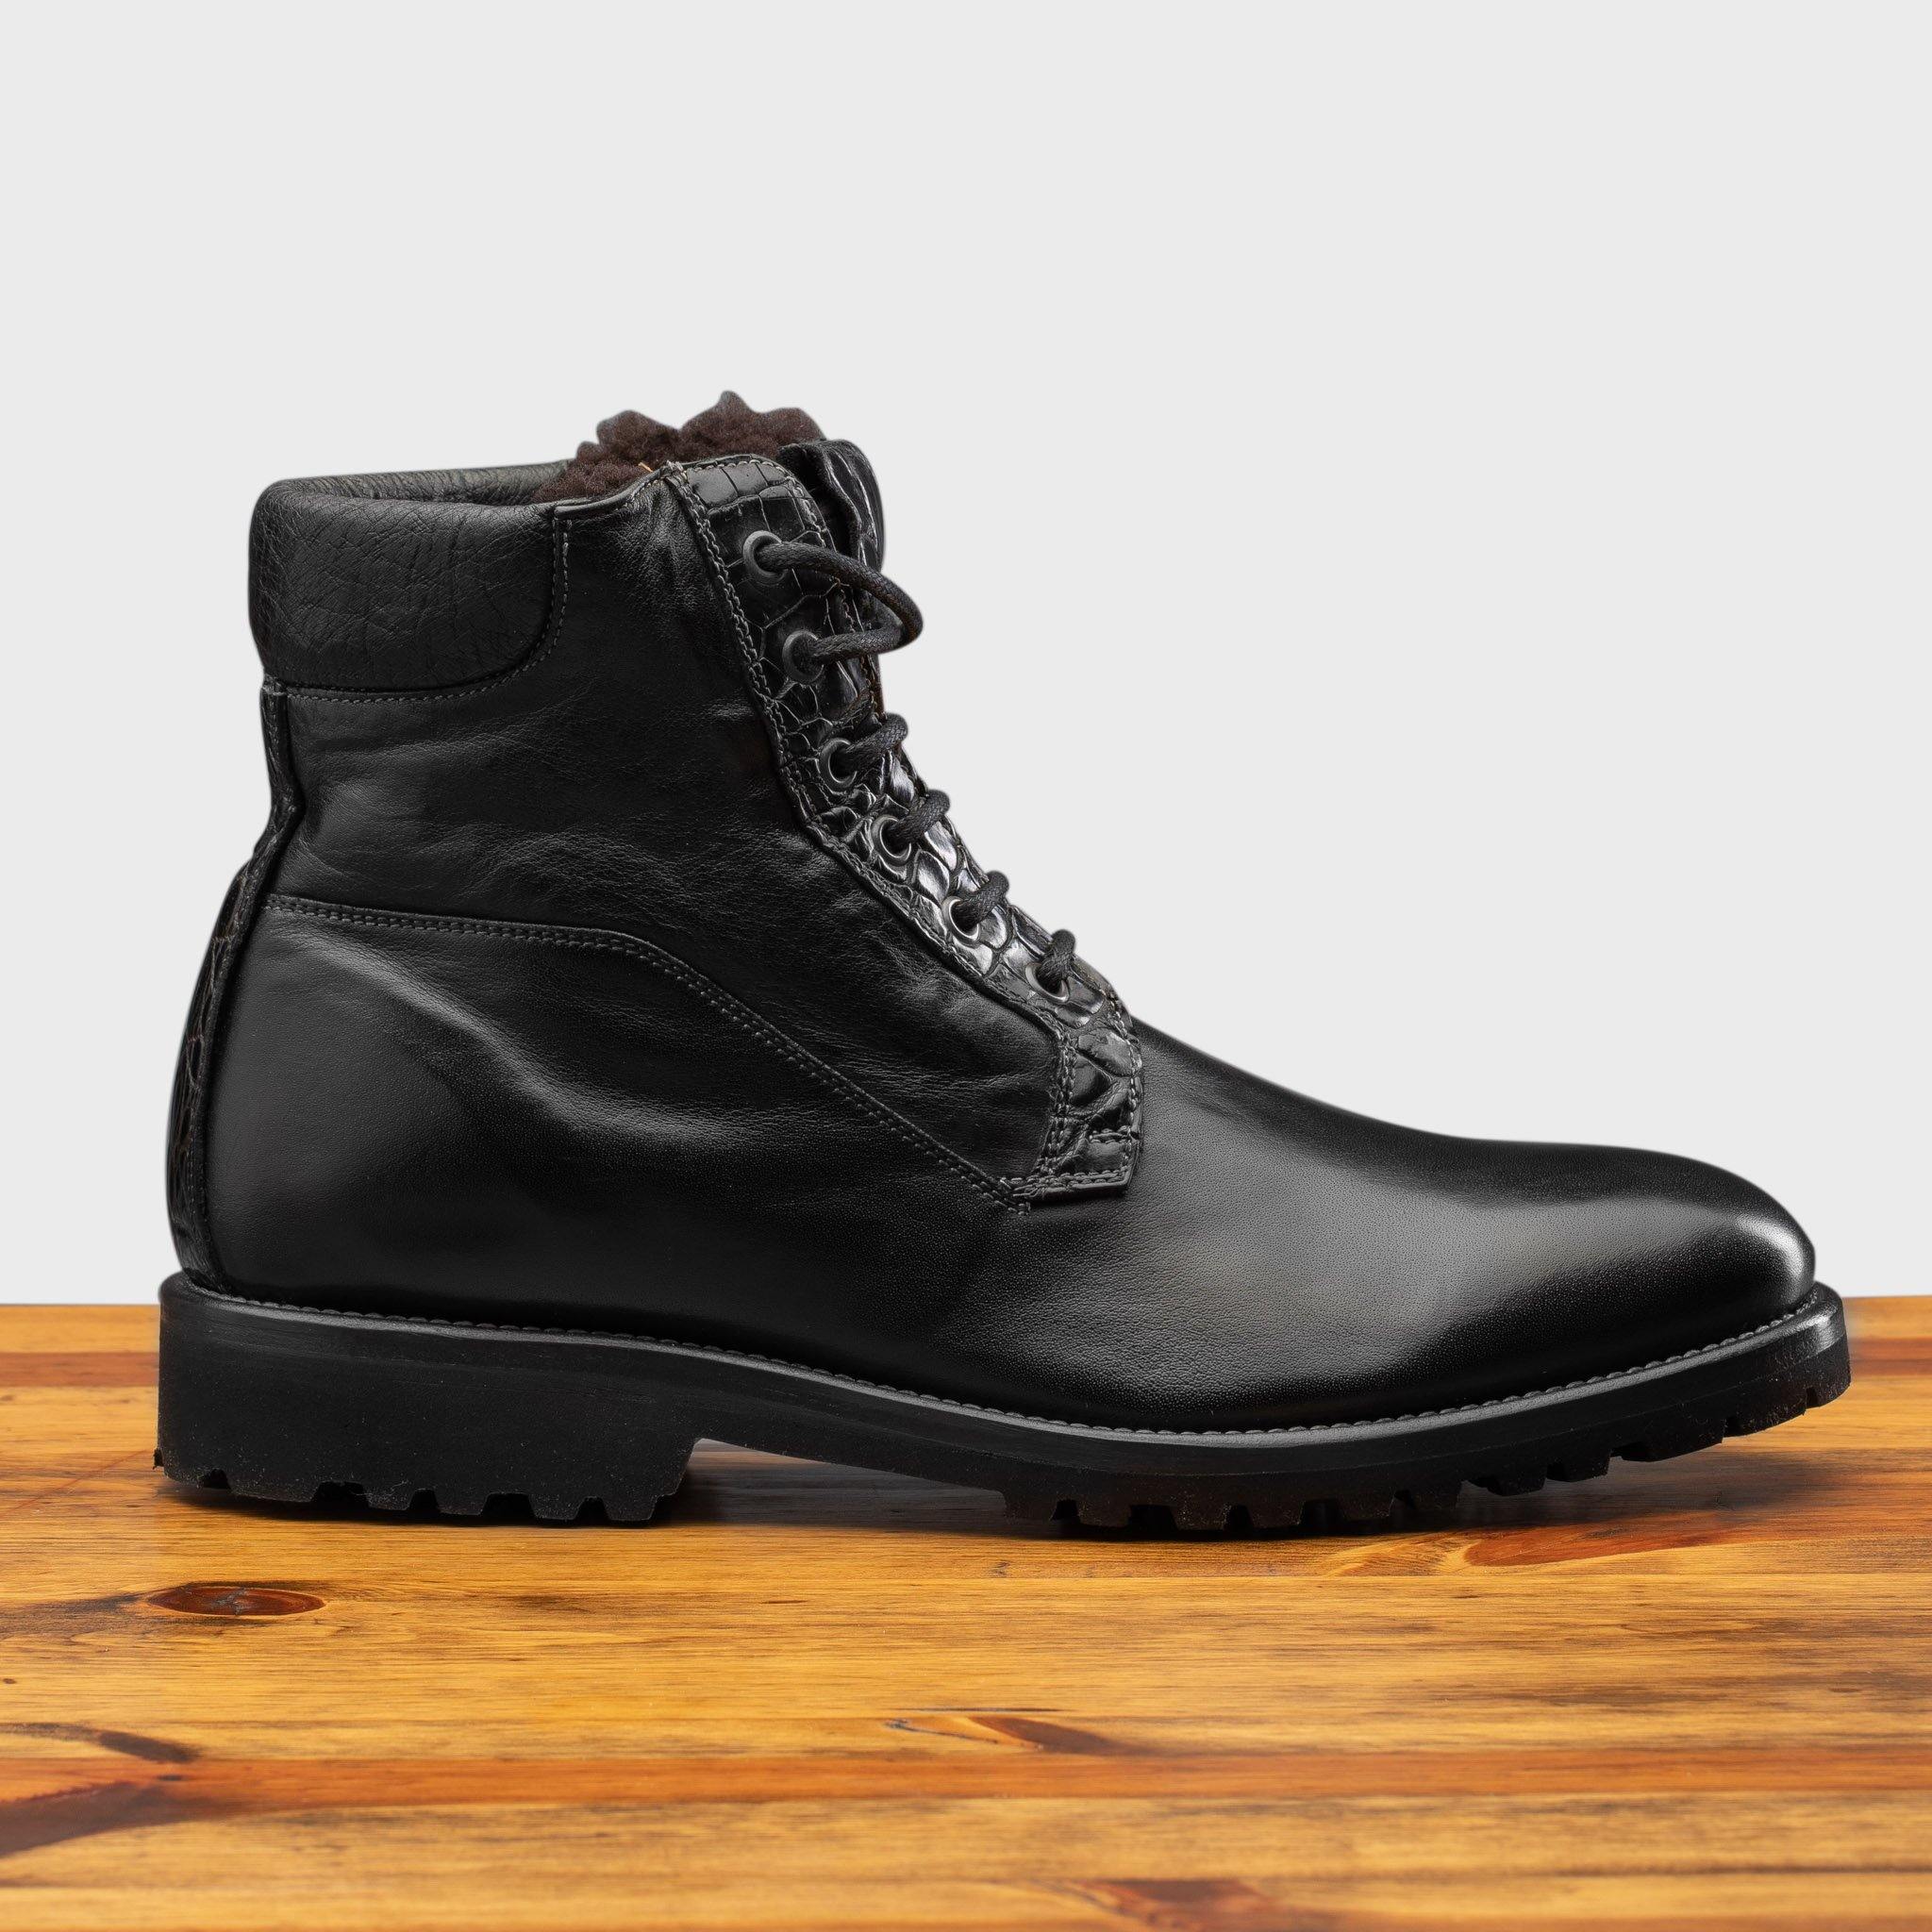 Side profile of the 3236 Calzoleria Toscana Black Shearling Boot on top of a wooden table